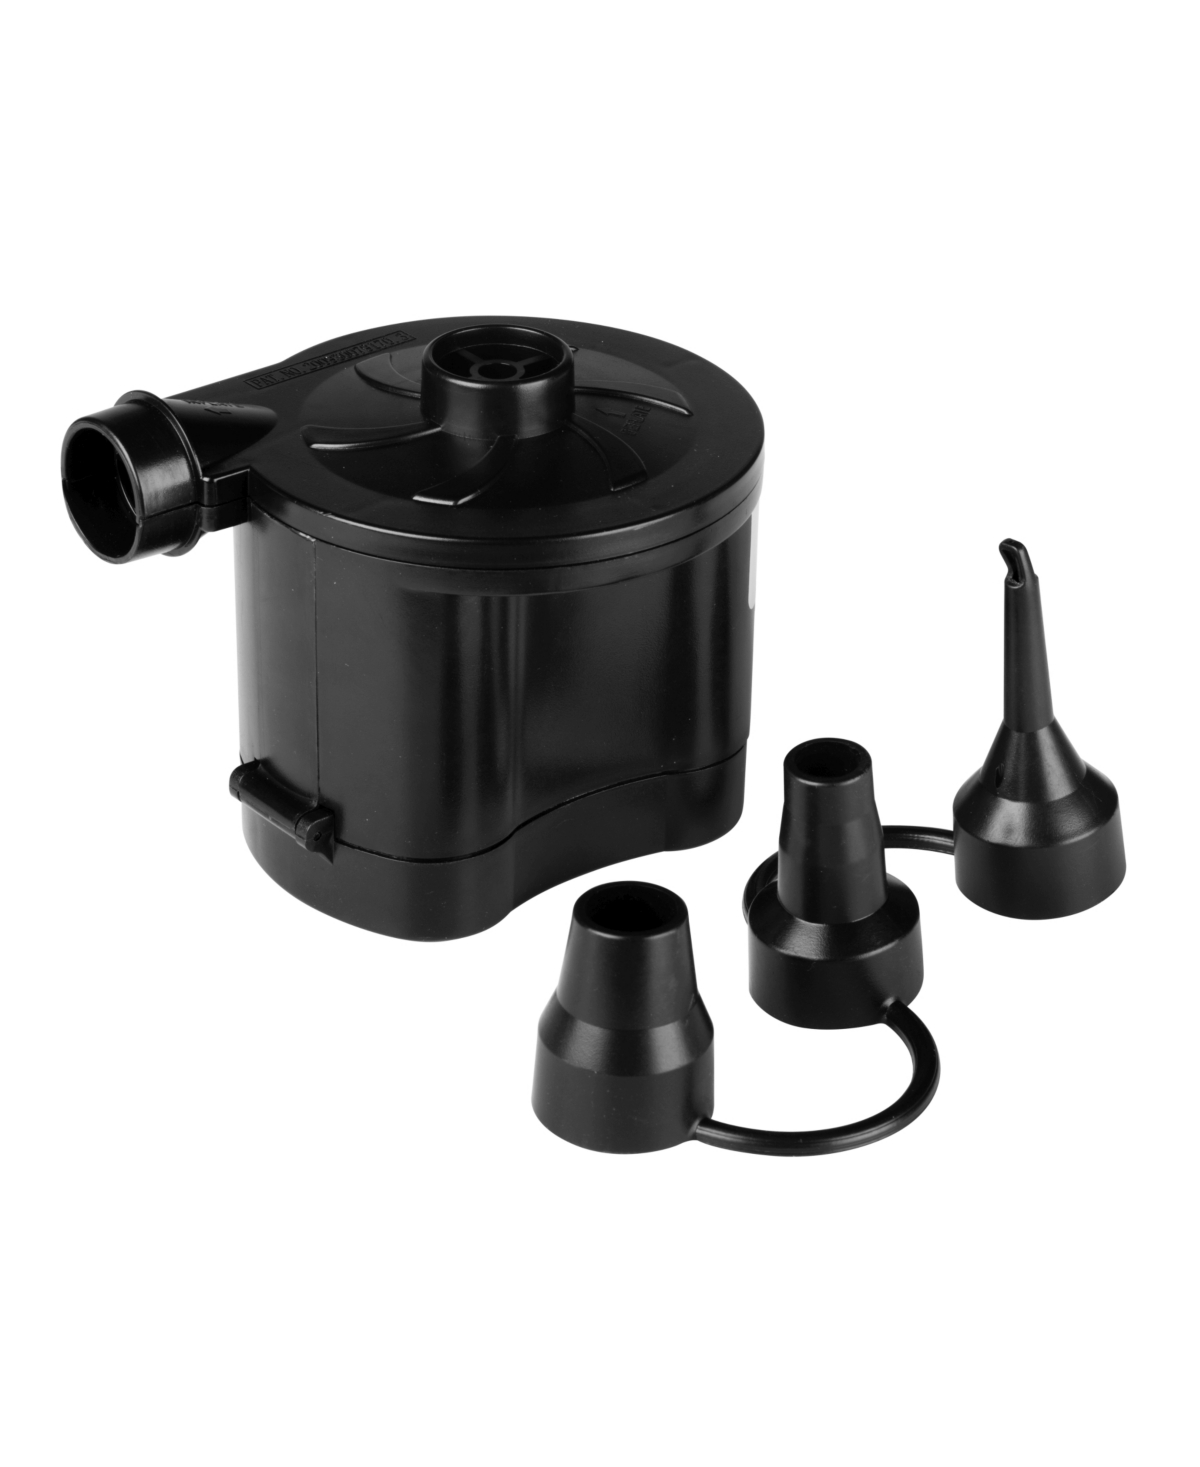 PoolCandy's Inflate-Mate Battery Air Pump